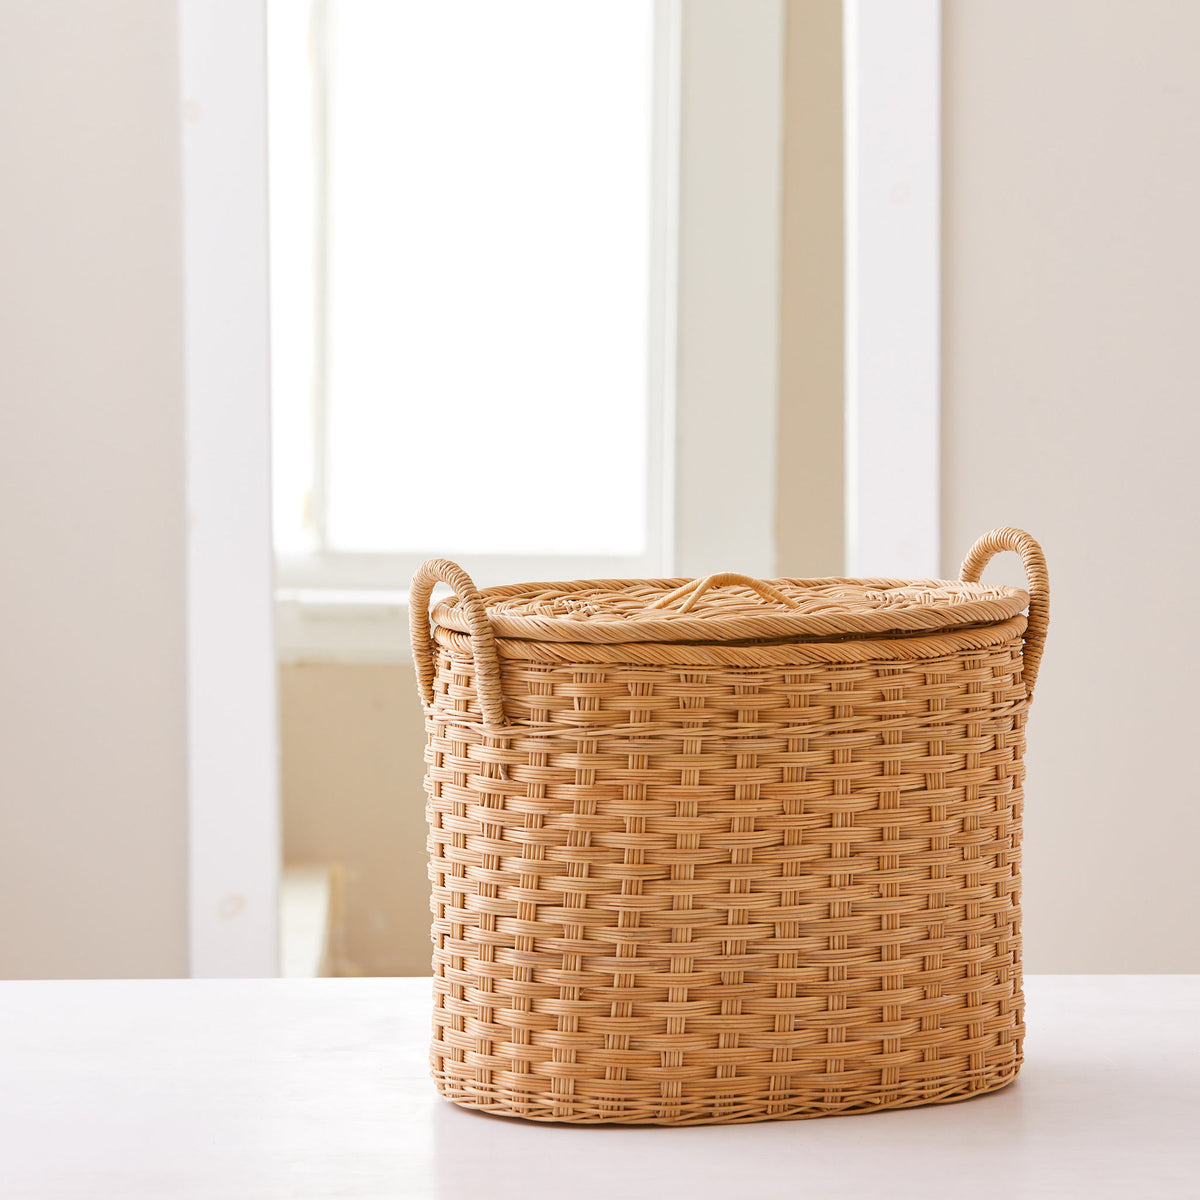 Oval rattan storage basket. Unique storage baskets with lids and handles. 5 sizes. Small basket shown. Great basket for storage. XL, L, M, S, XS.